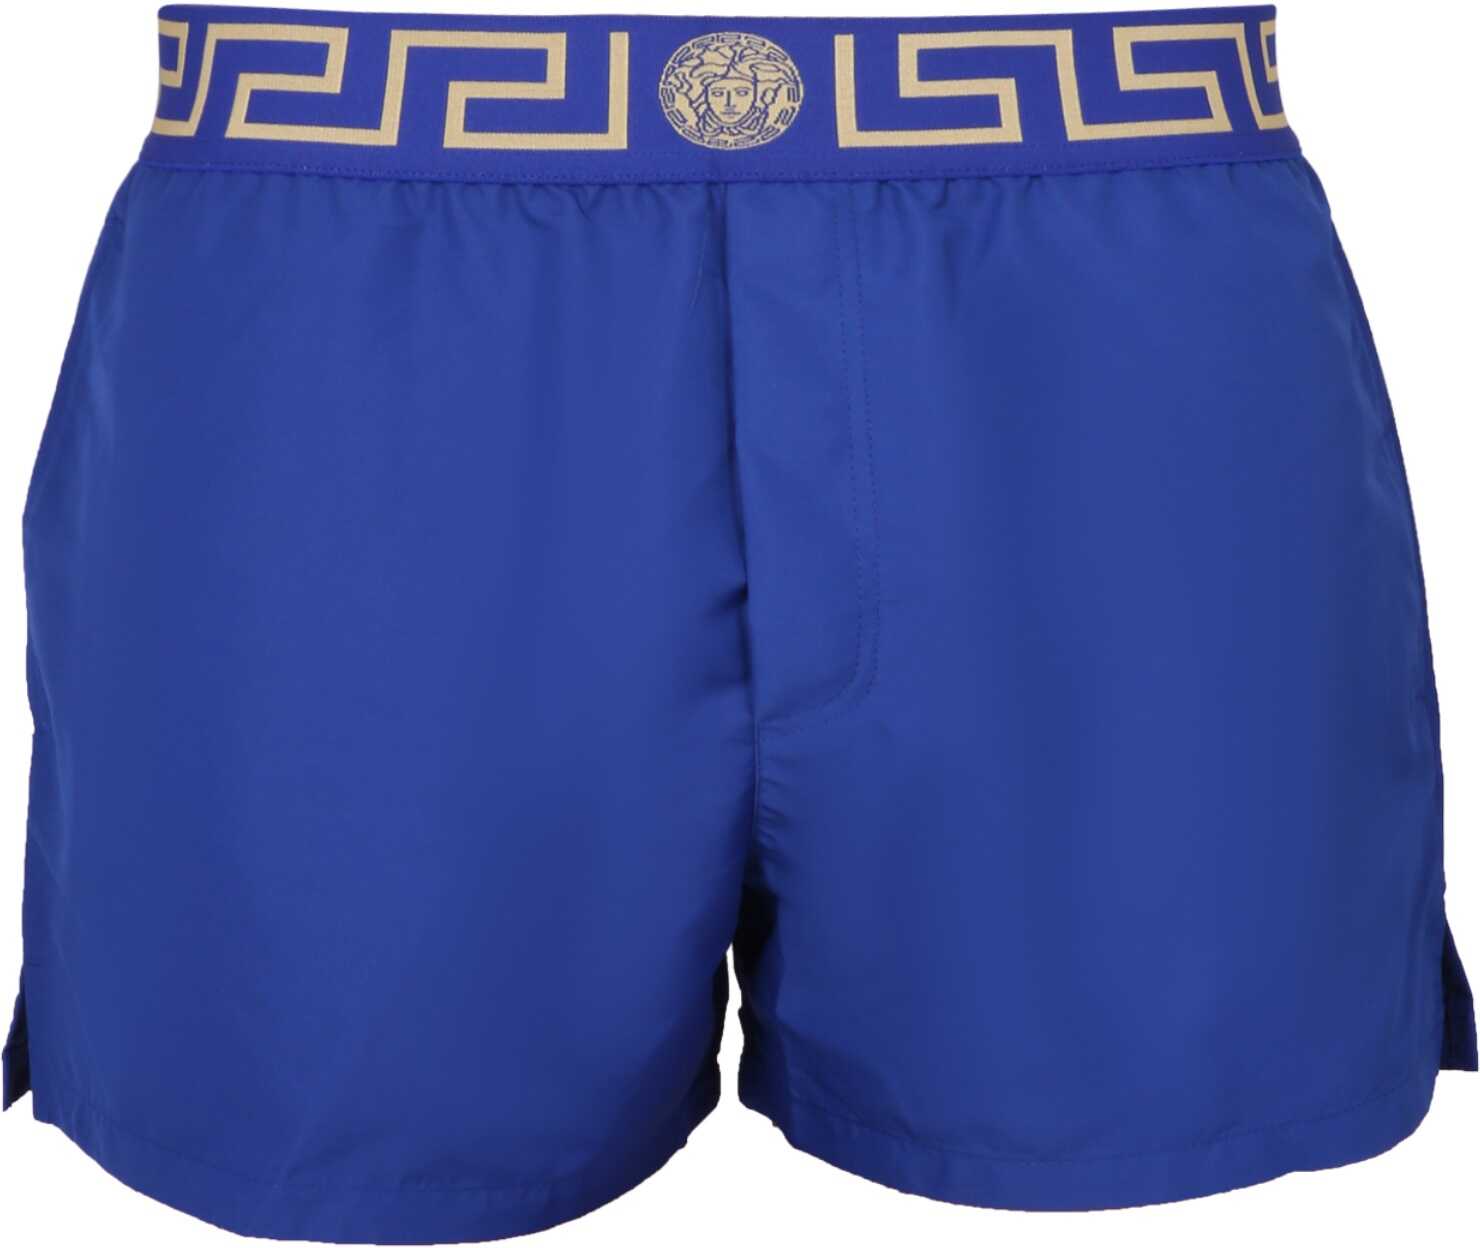 Versace Boxer Swimsuit With Greek Border BLUE